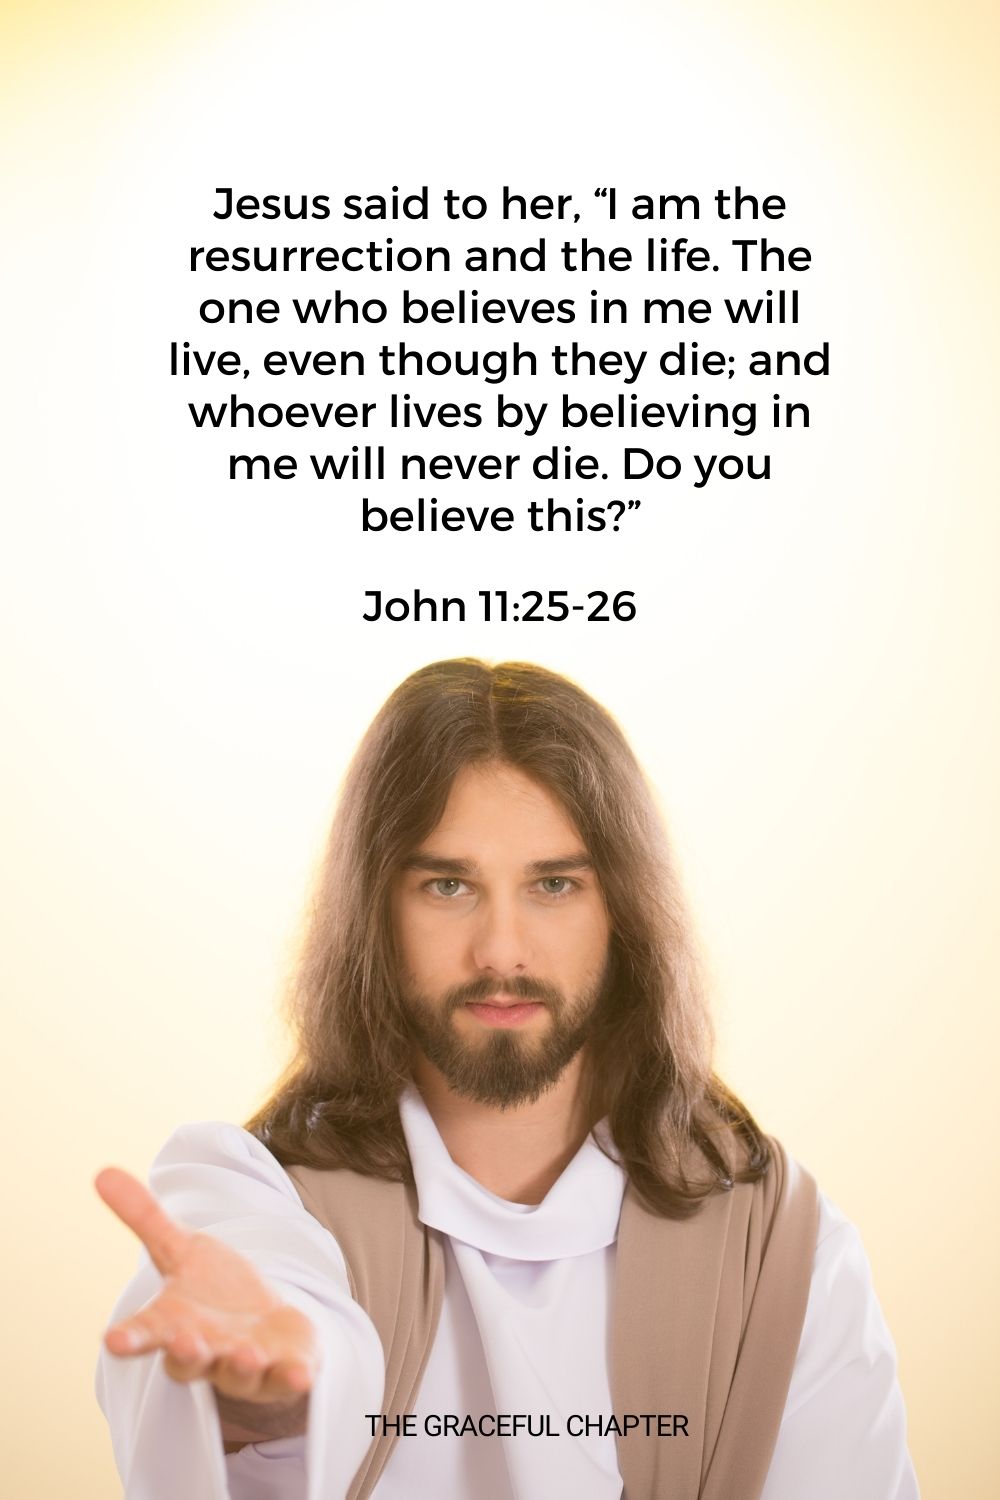 Jesus said to her, “I am the resurrection and the life. The one who believes in me will live, even though they die; and whoever lives by believing in me will never die. Do you believe this?” John 11:25-26